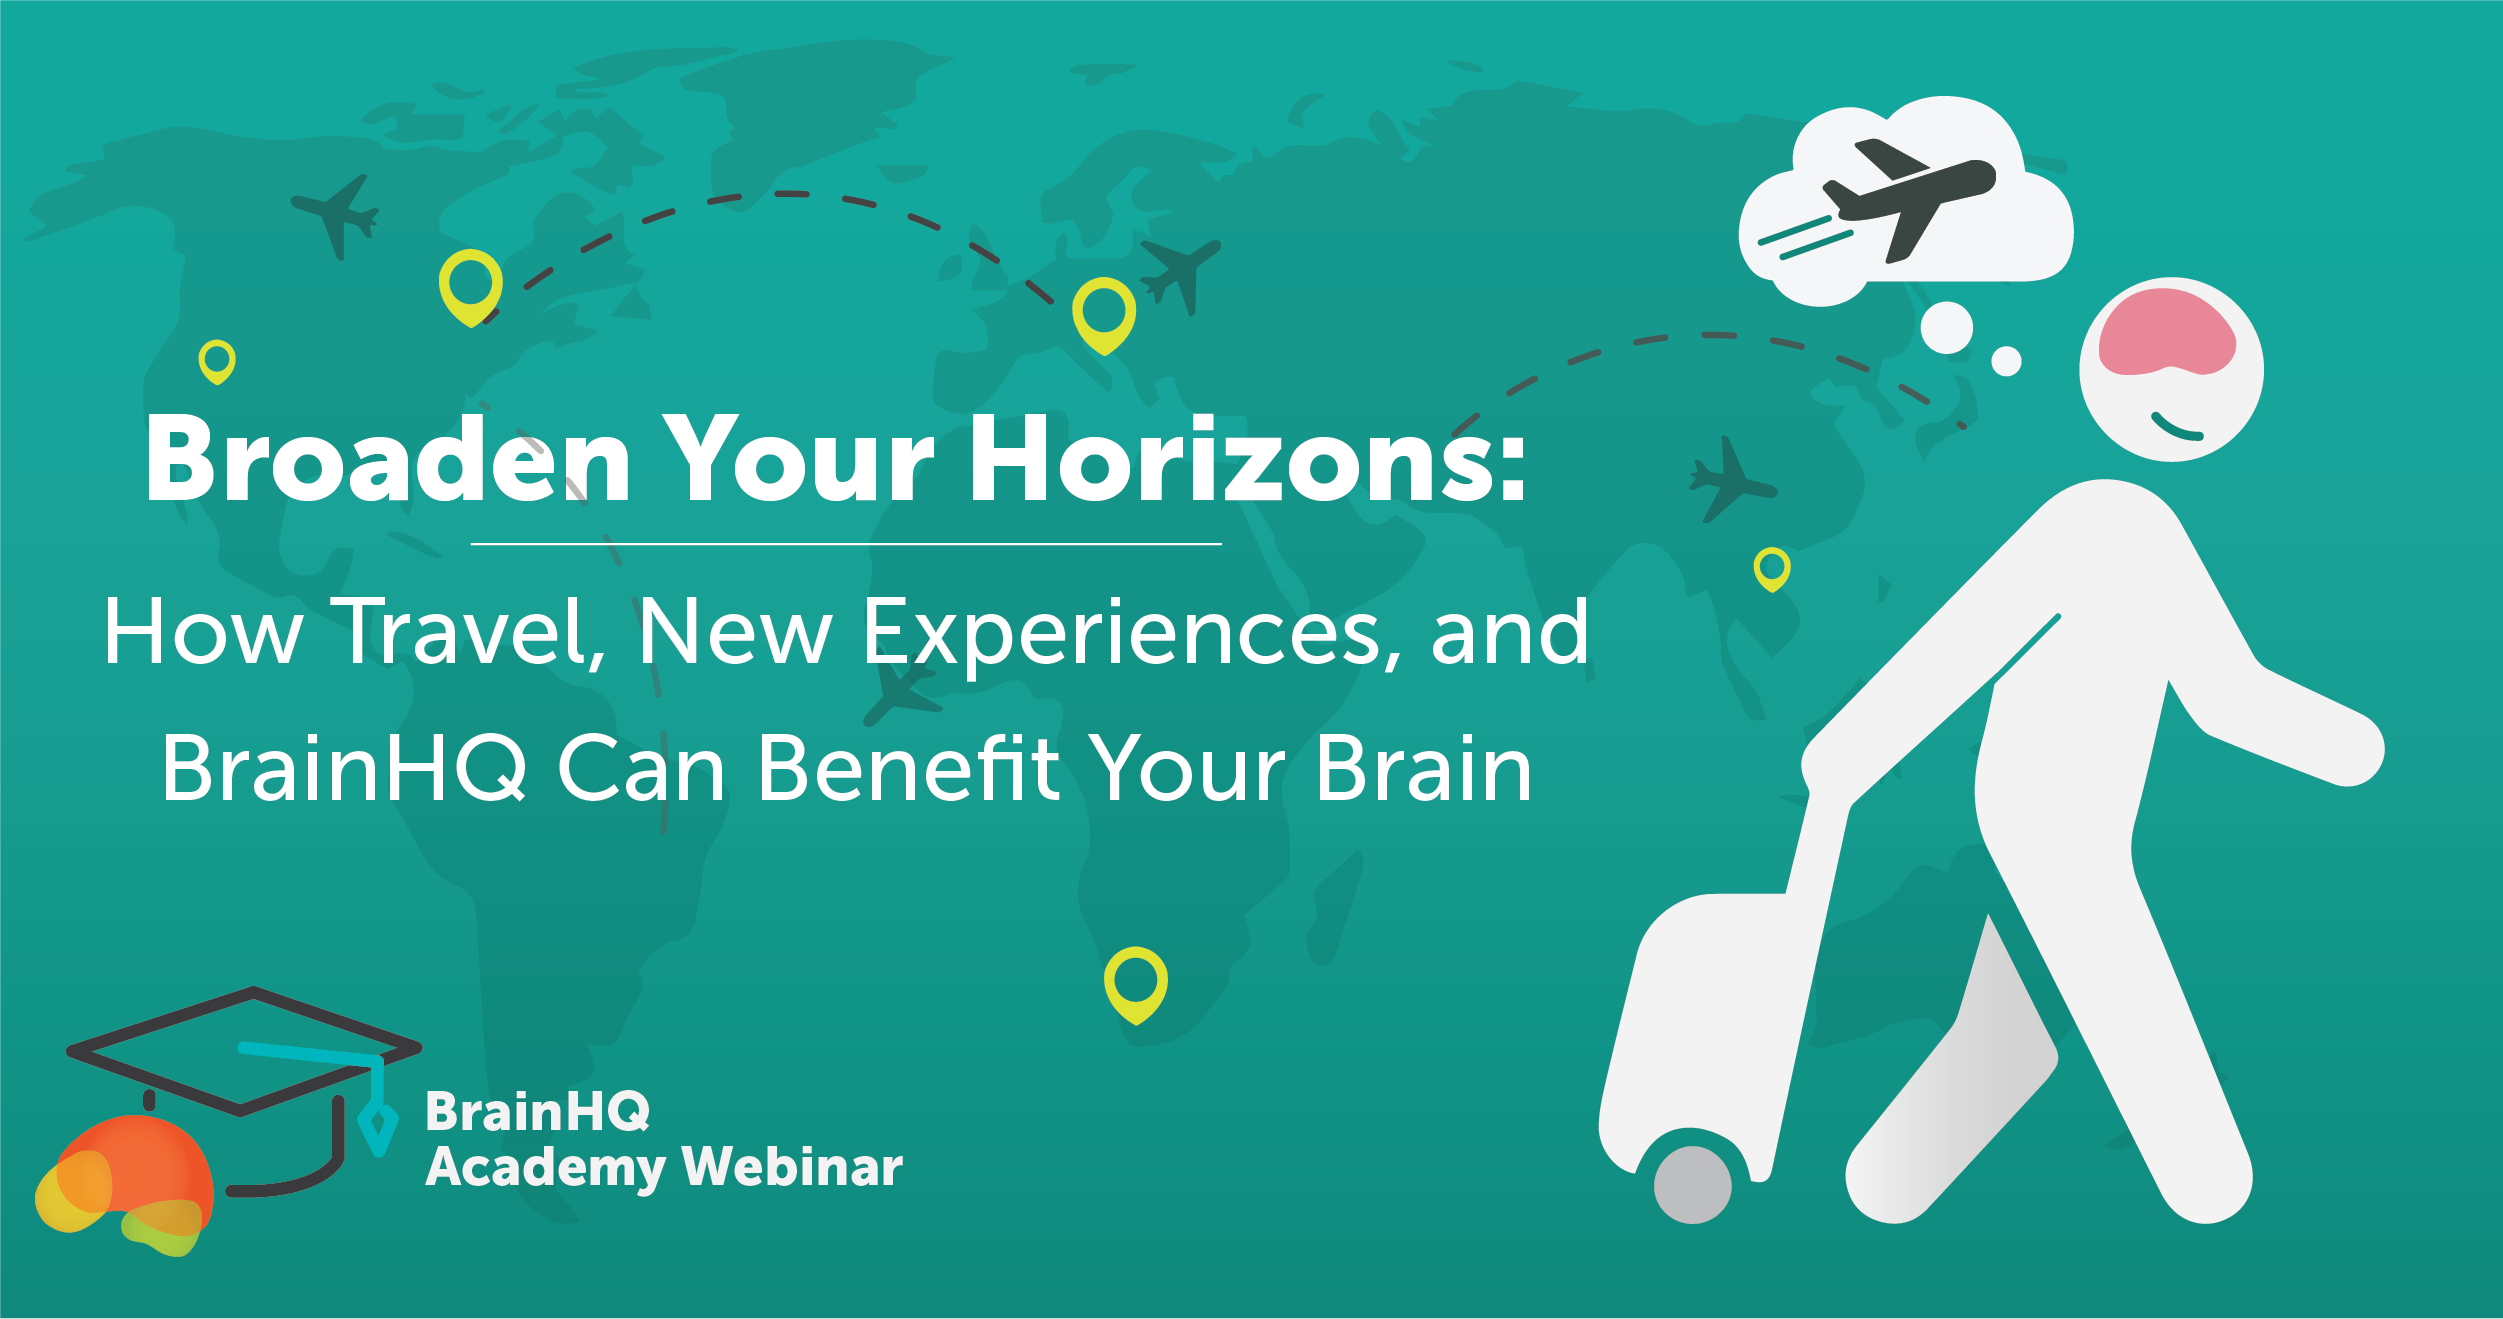 How Travel, Experiences, and BrainHQ Can Benefit Your Brain